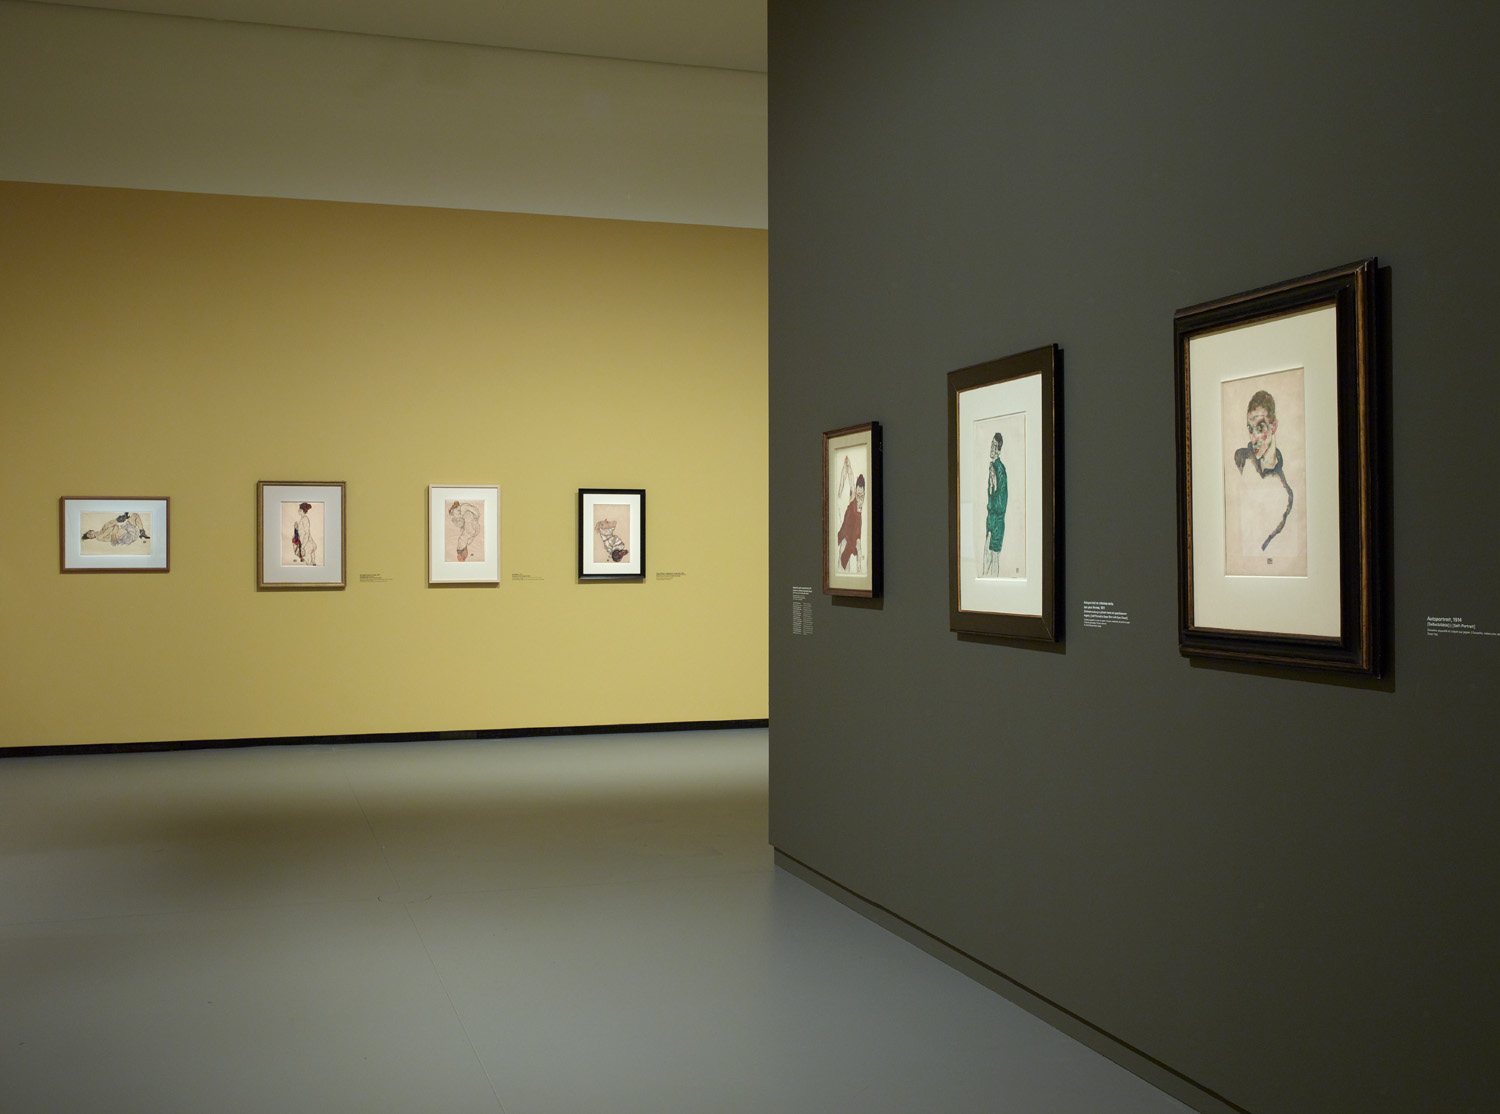 Installation view of the «Egon Schiele», gallery 1 (level -1), Fondation Louis Vuitton, Paris, from 3 October 2018 to 14 January 2019. © Fondation Louis Vuitton / Marc Domage